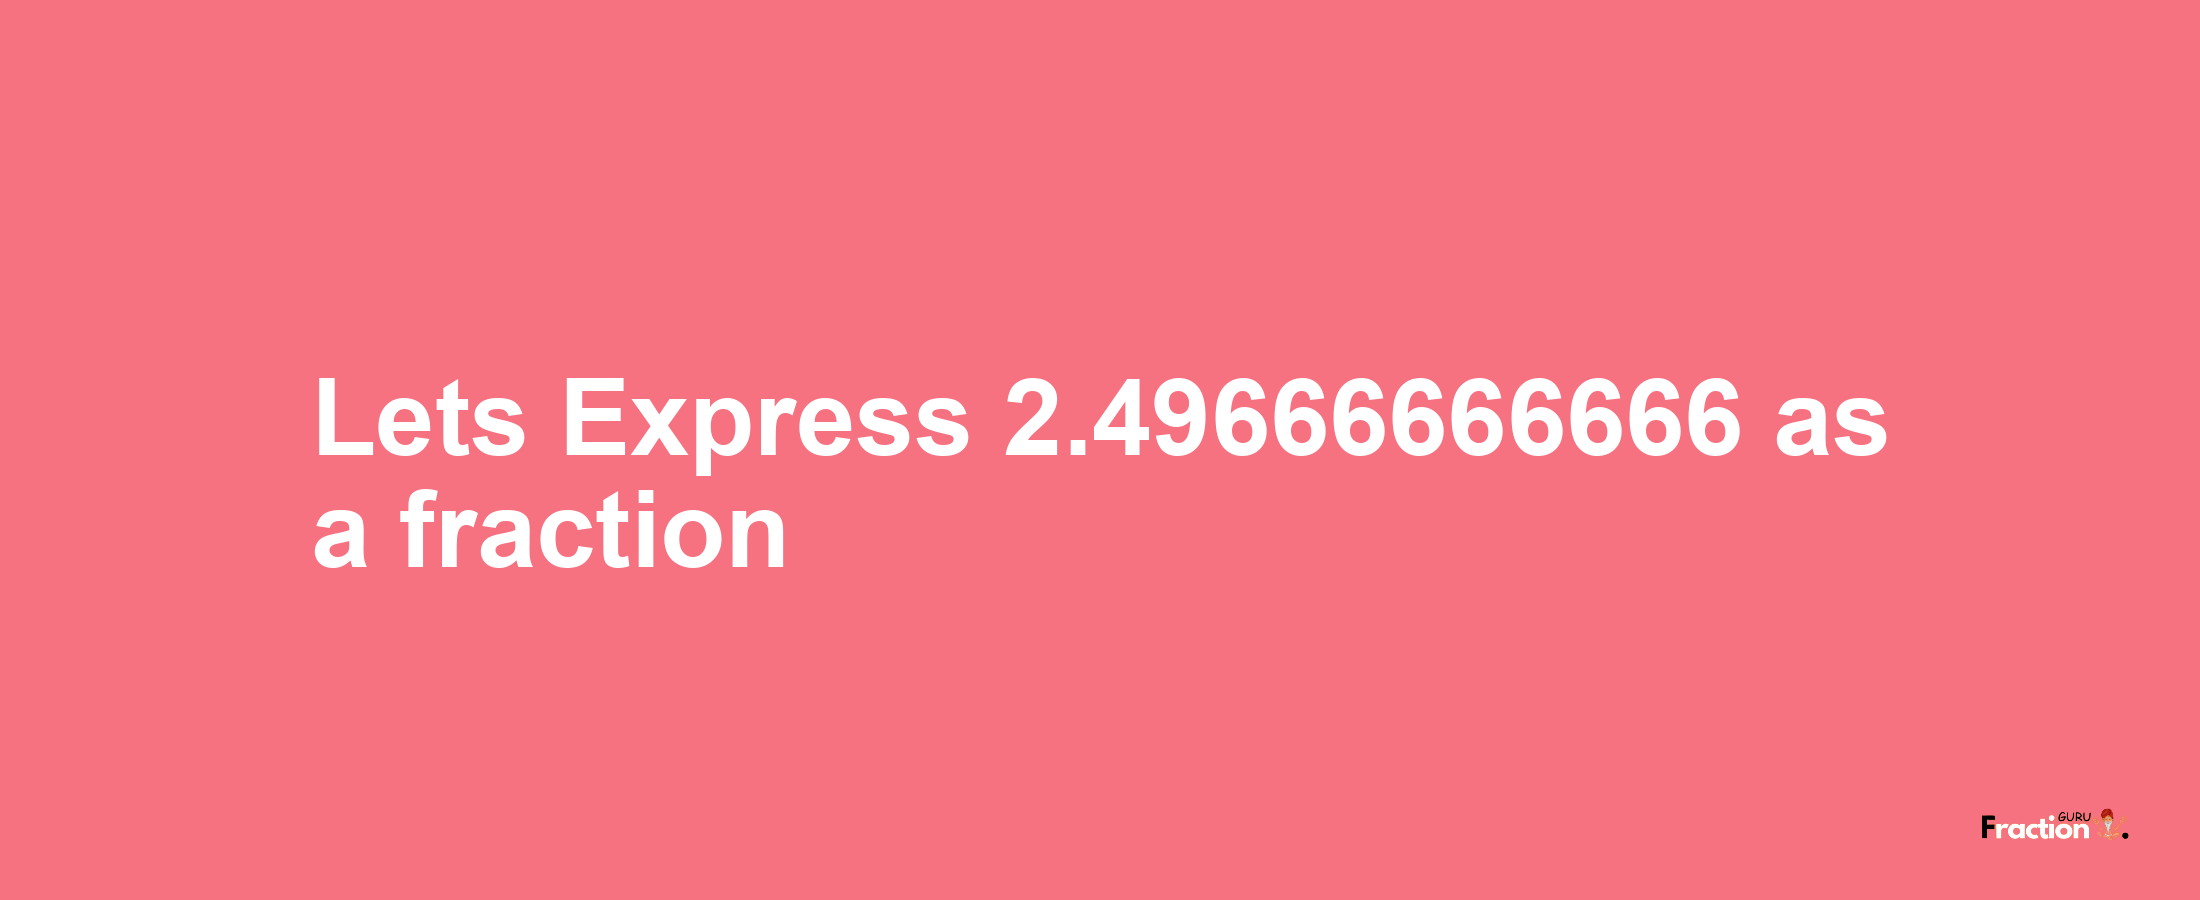 Lets Express 2.49666666666 as afraction